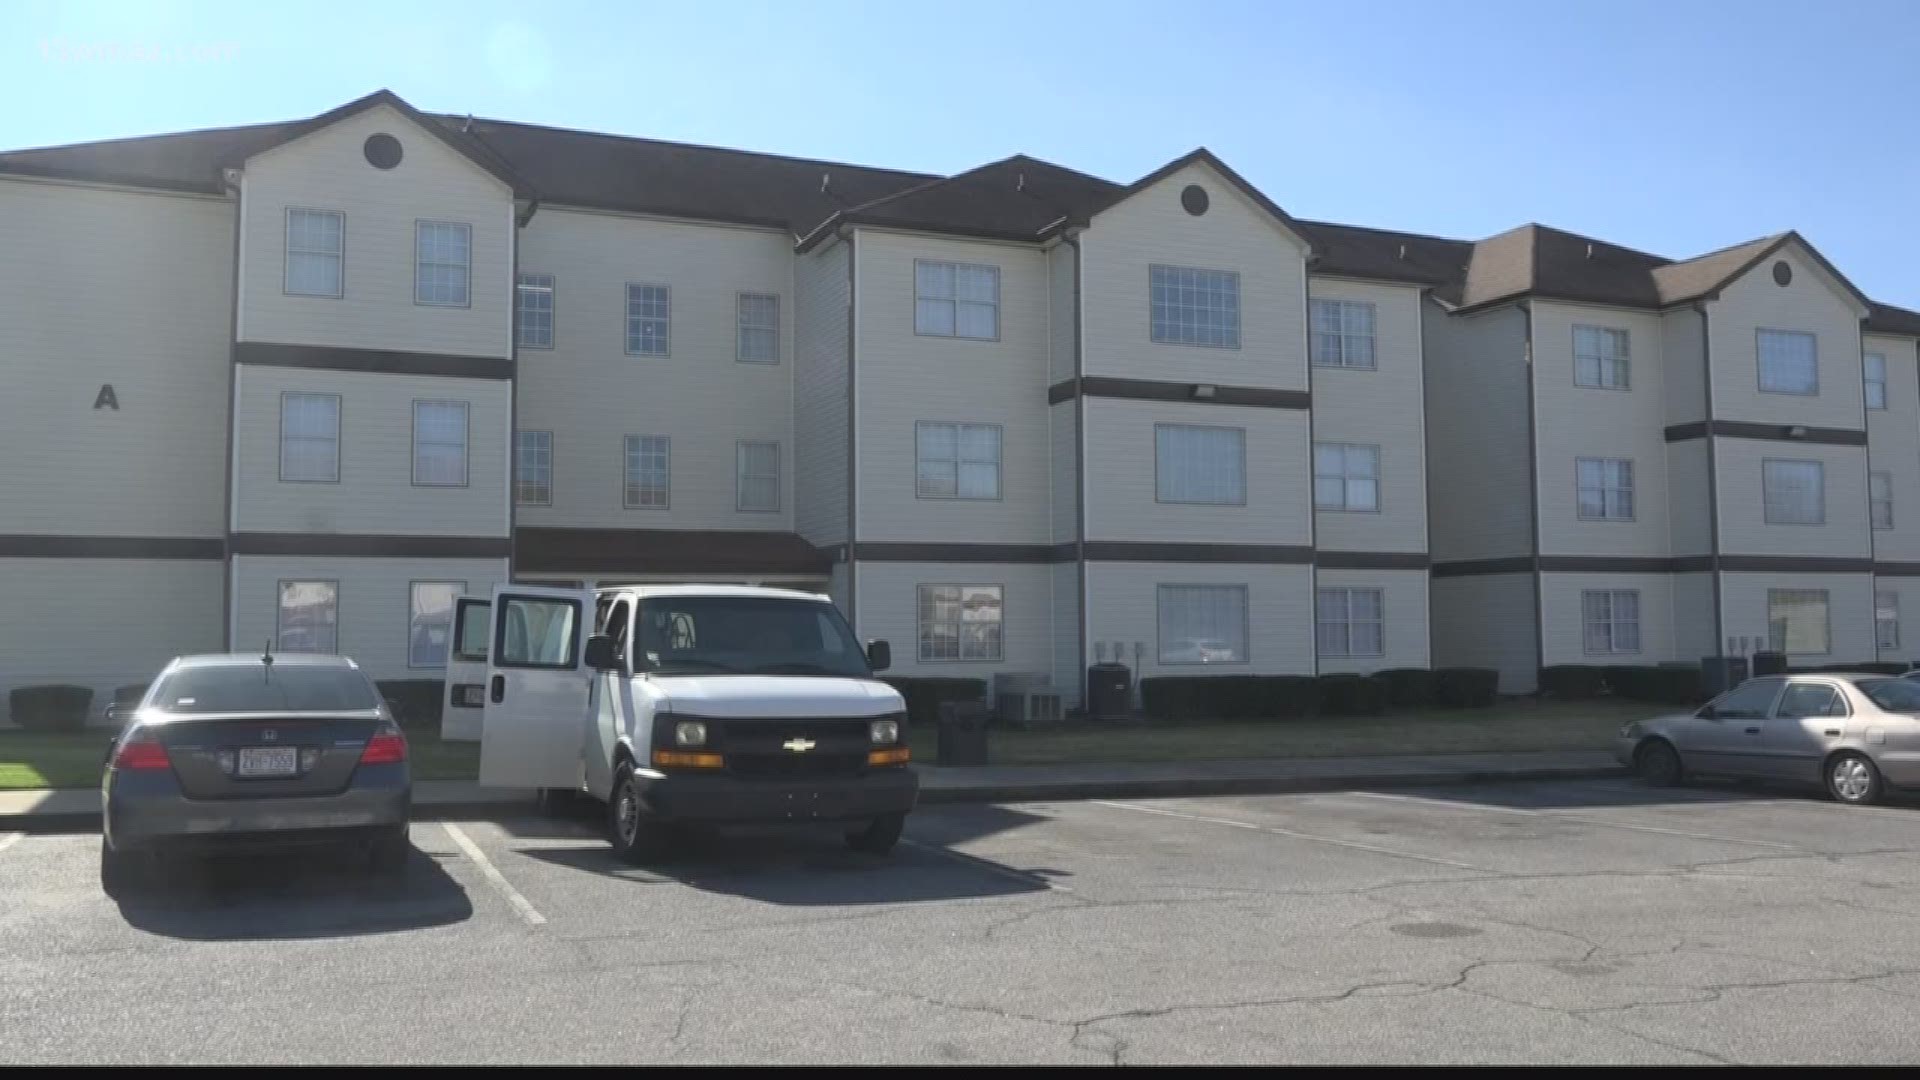 Fort Valley State University students who live in one off-campus apartment building came back to check on their belongings after a pipe burst overnight.